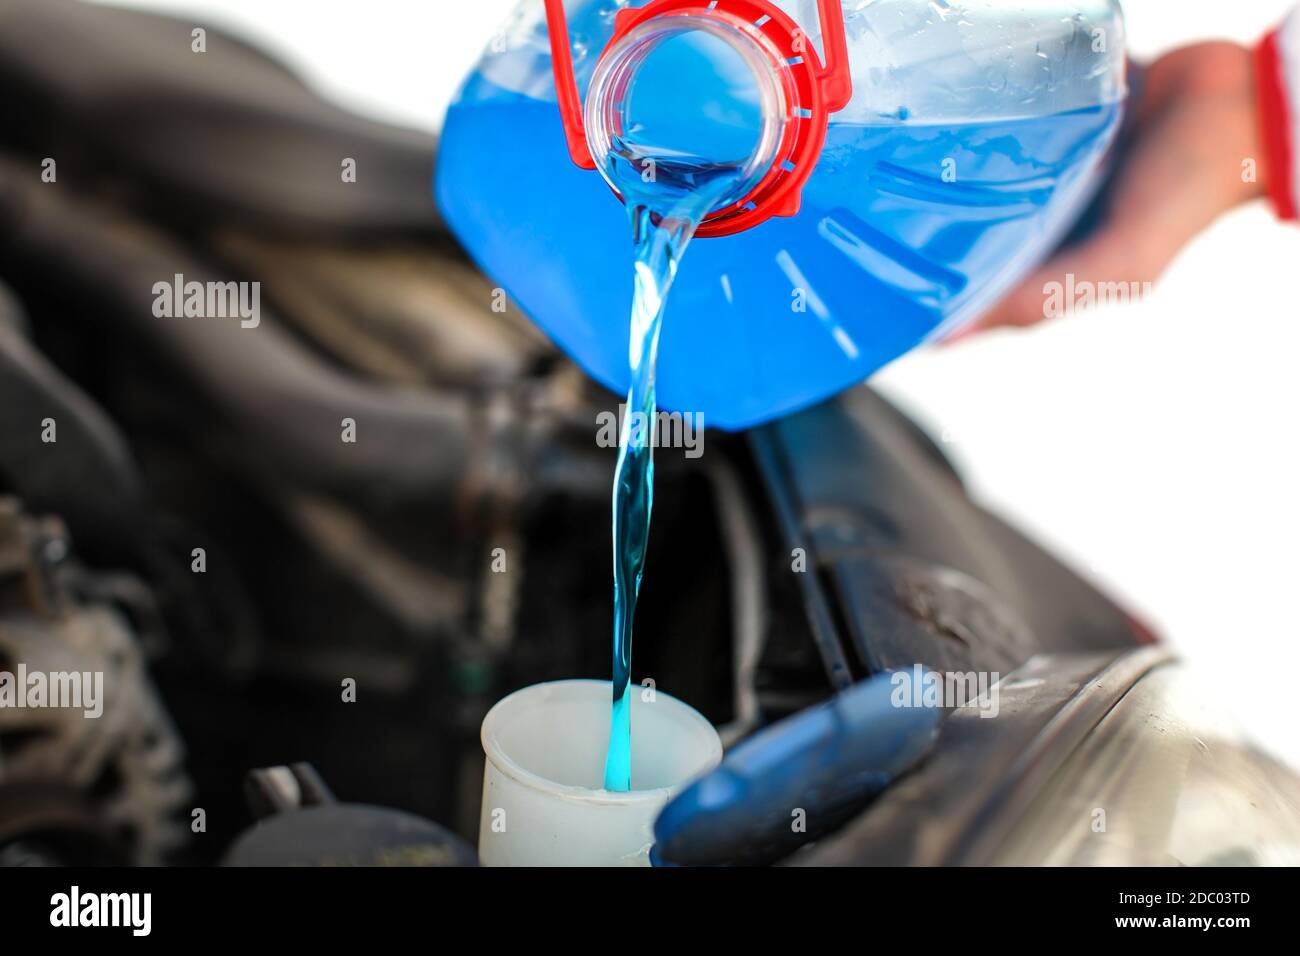 Woman pouring blue antifreeze liquid into dirty car. Stock Photo